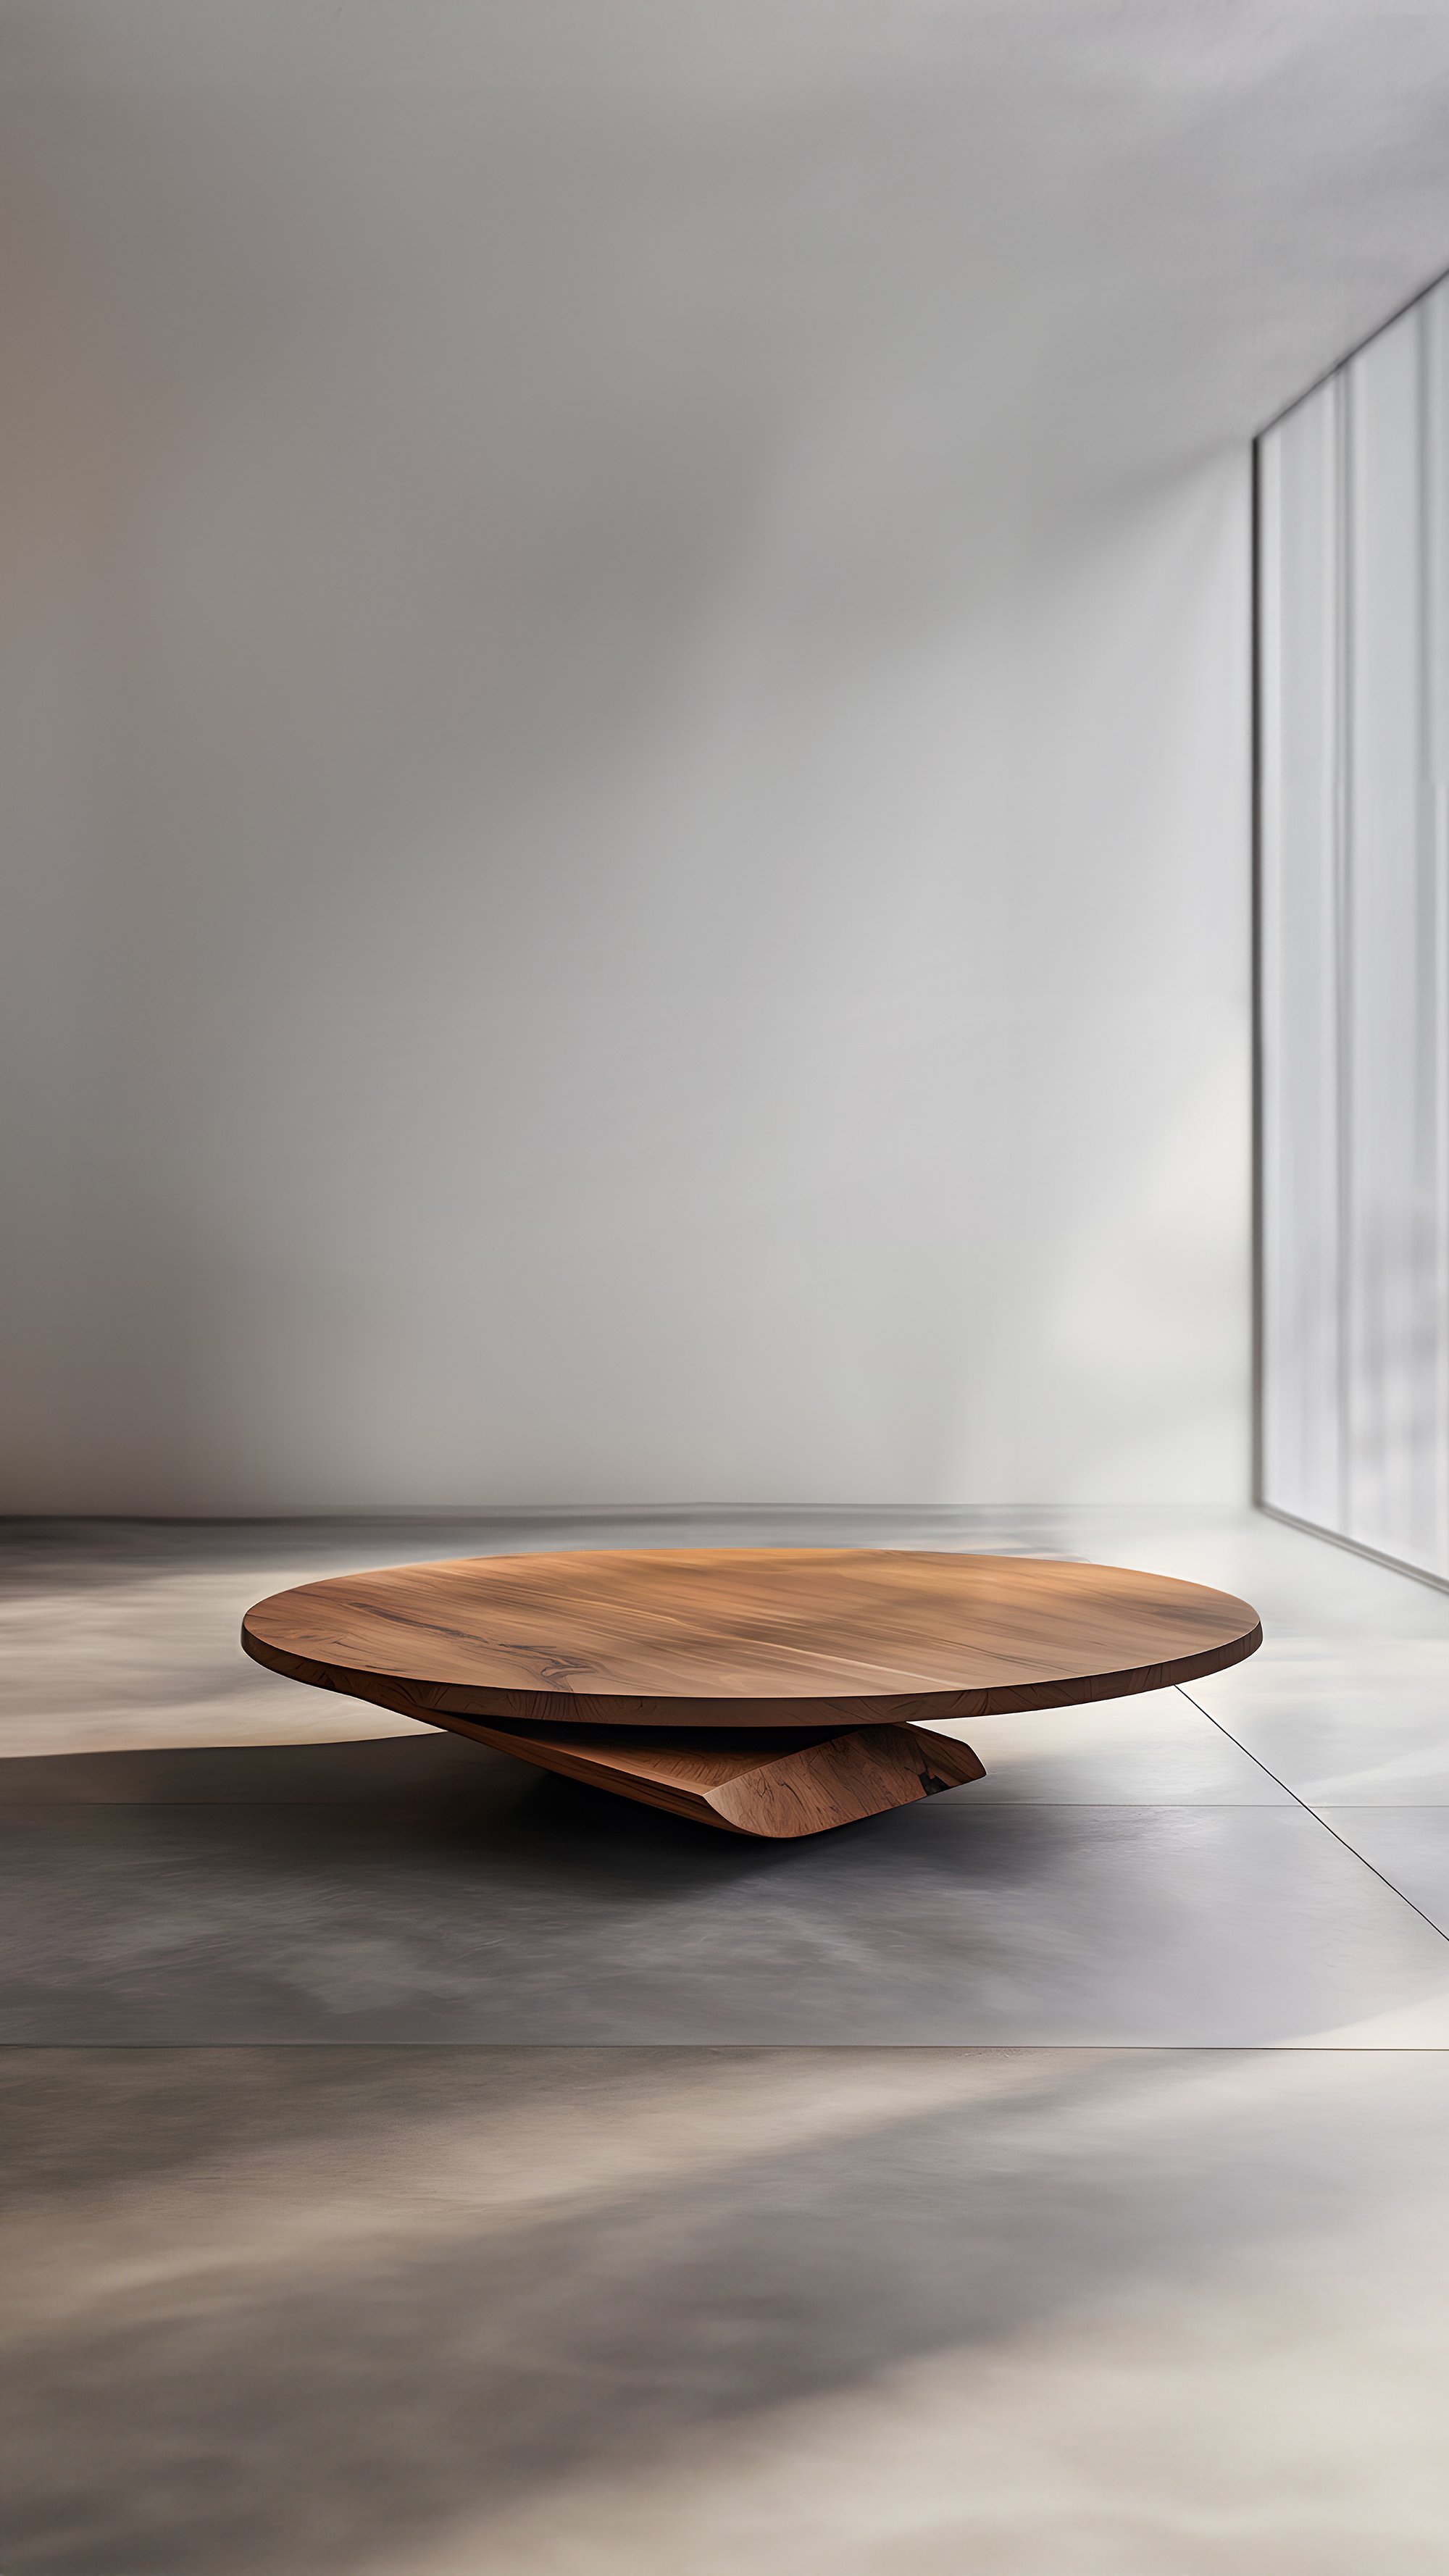 Sculptural Coffee Table Made of Solid Wood, Center Table Solace S51 by Joel Escalona — 6.jpg